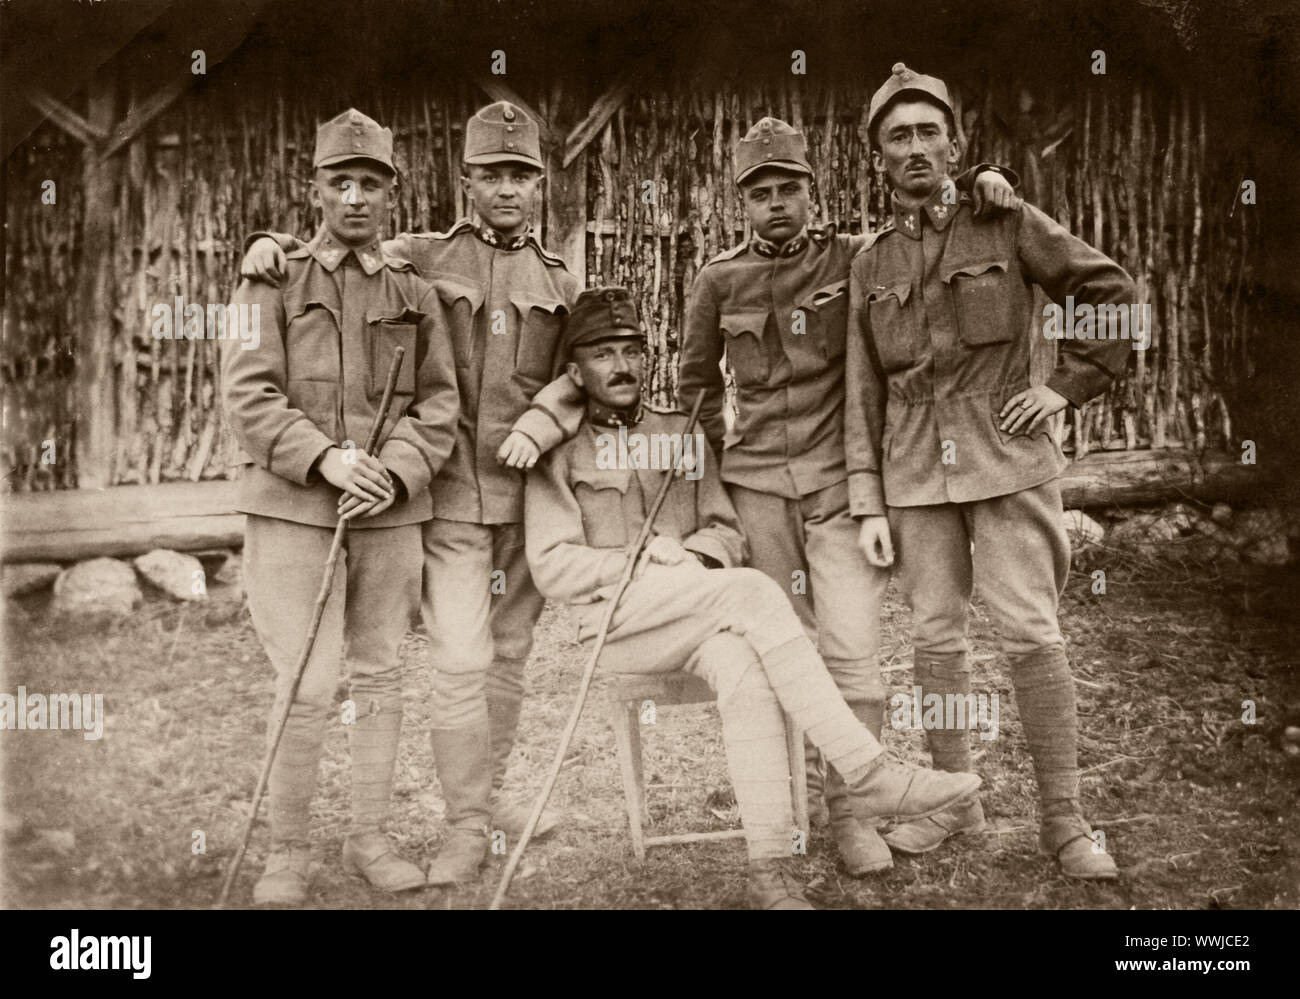 soldiers, historic photograph, Stock Photo